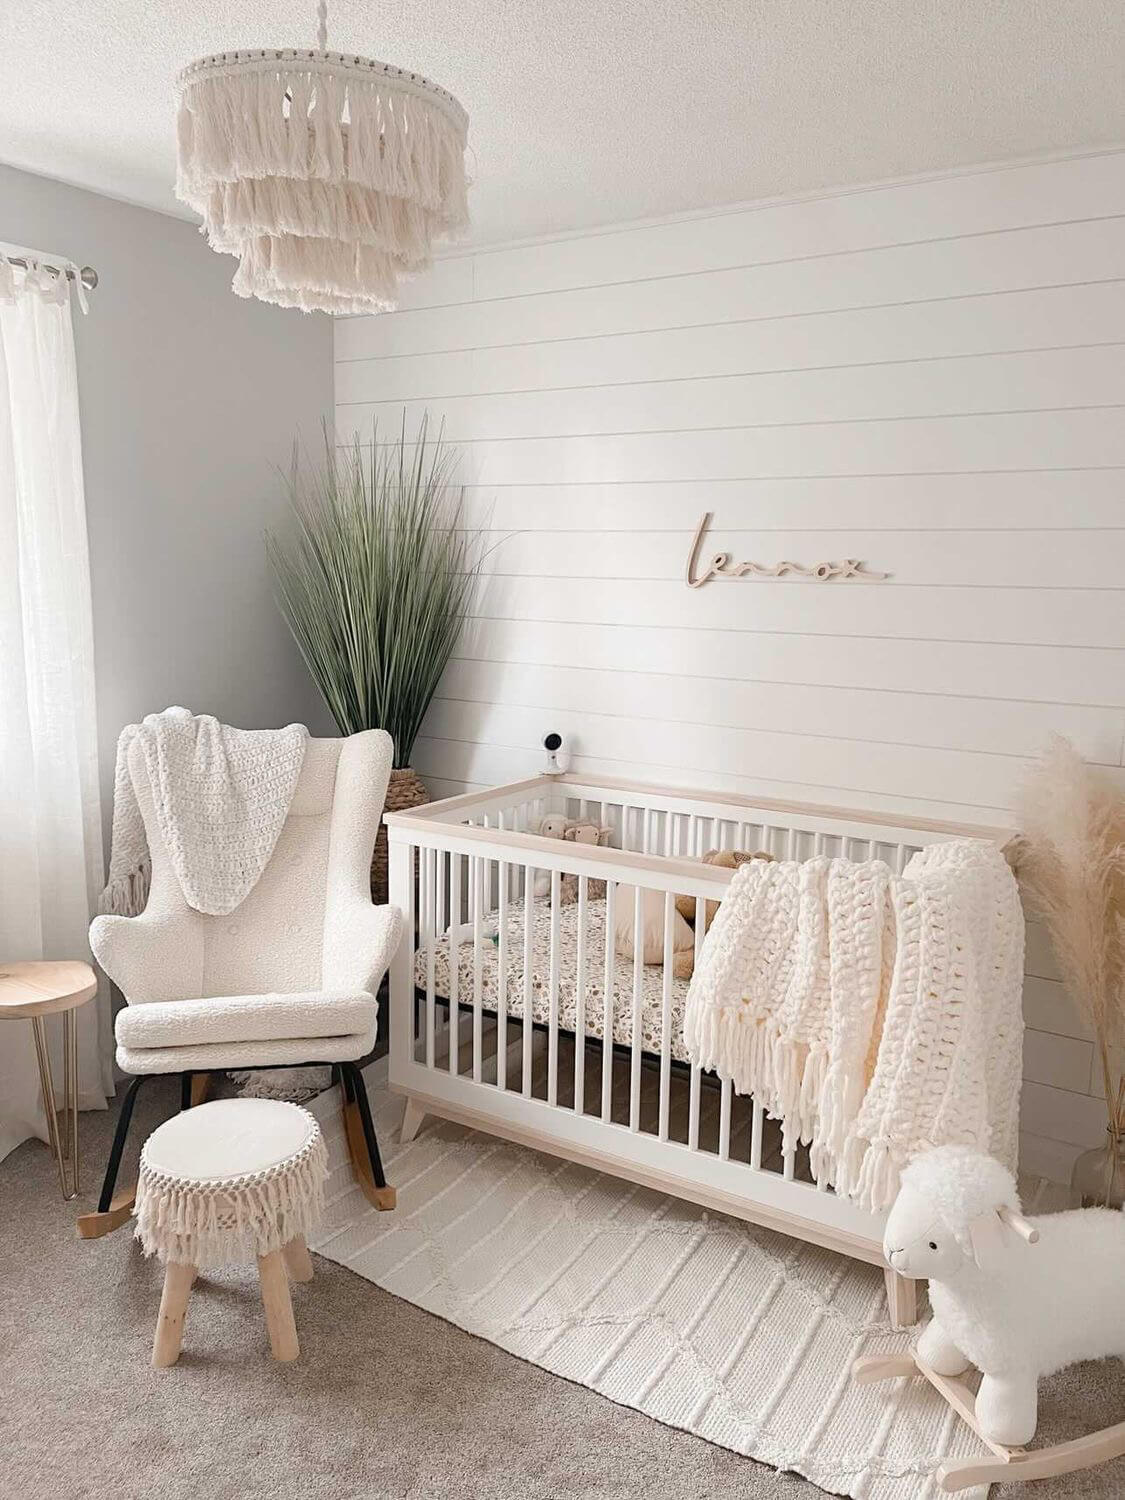 nursery inspiration with a name sign